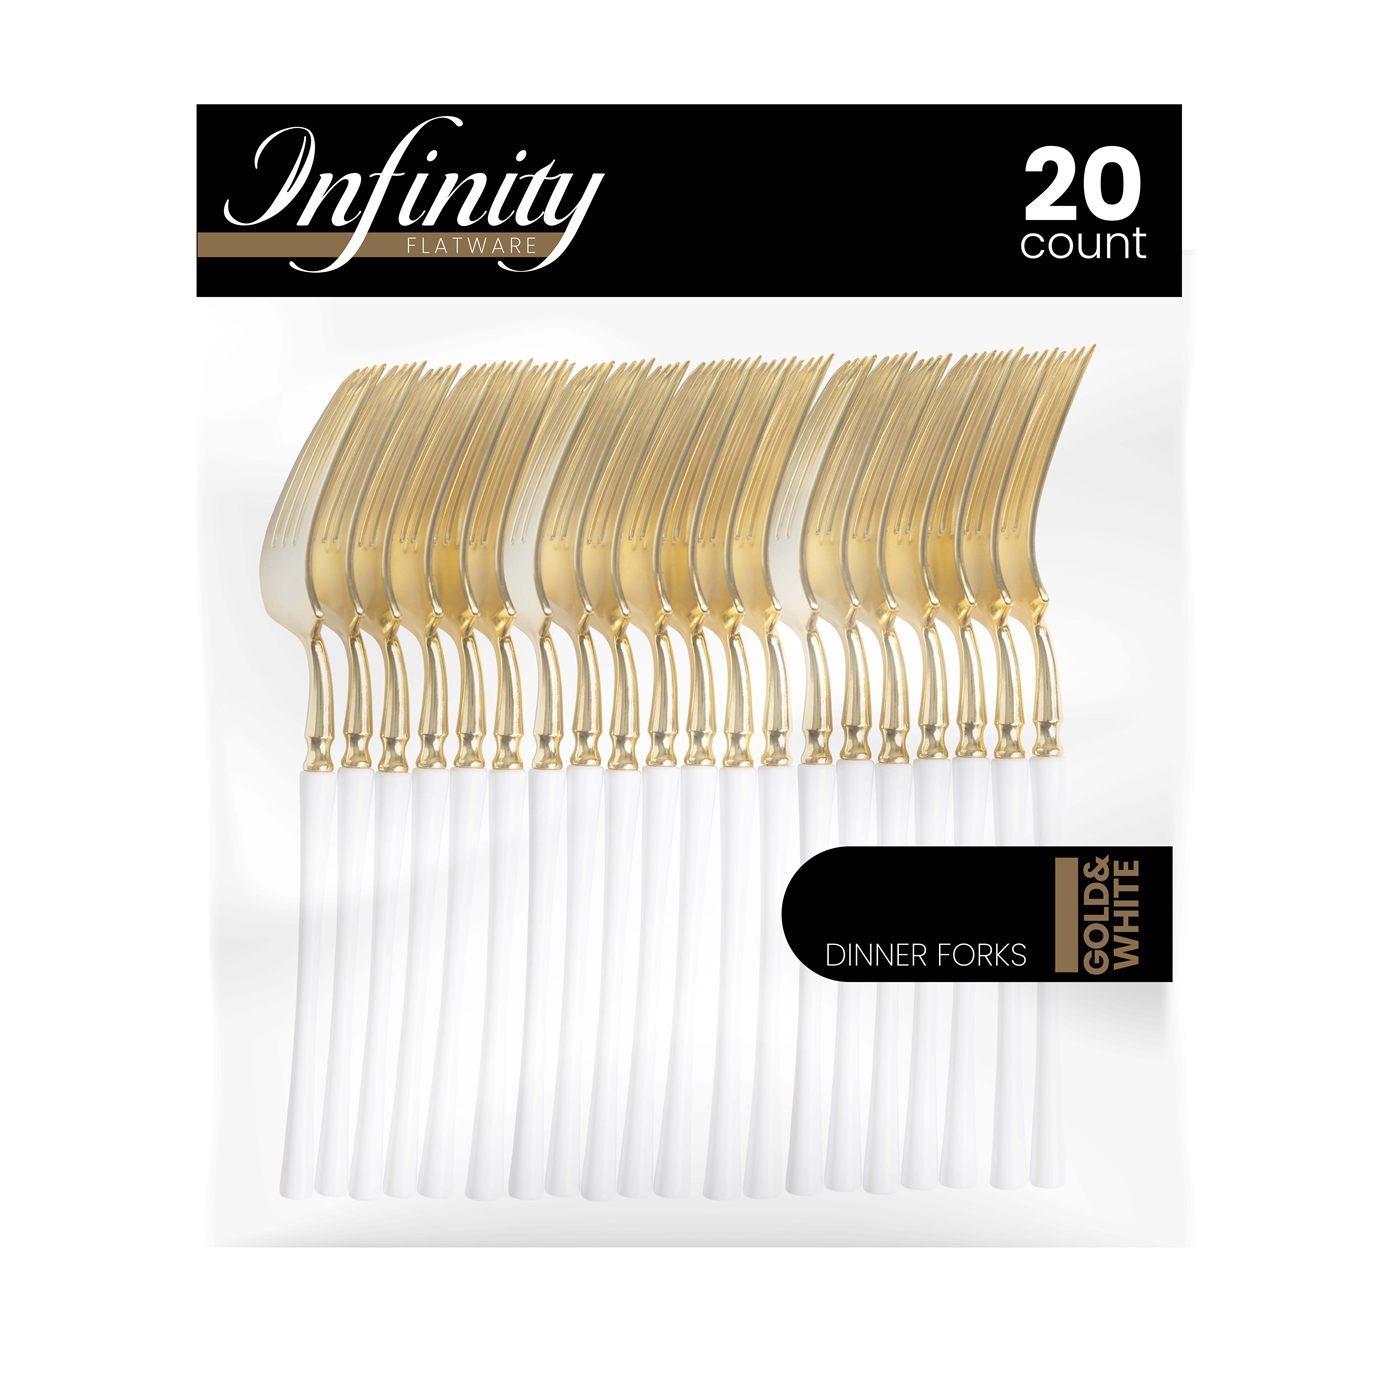 Infinity Flatware Gold and White Dinner Forks 20ct